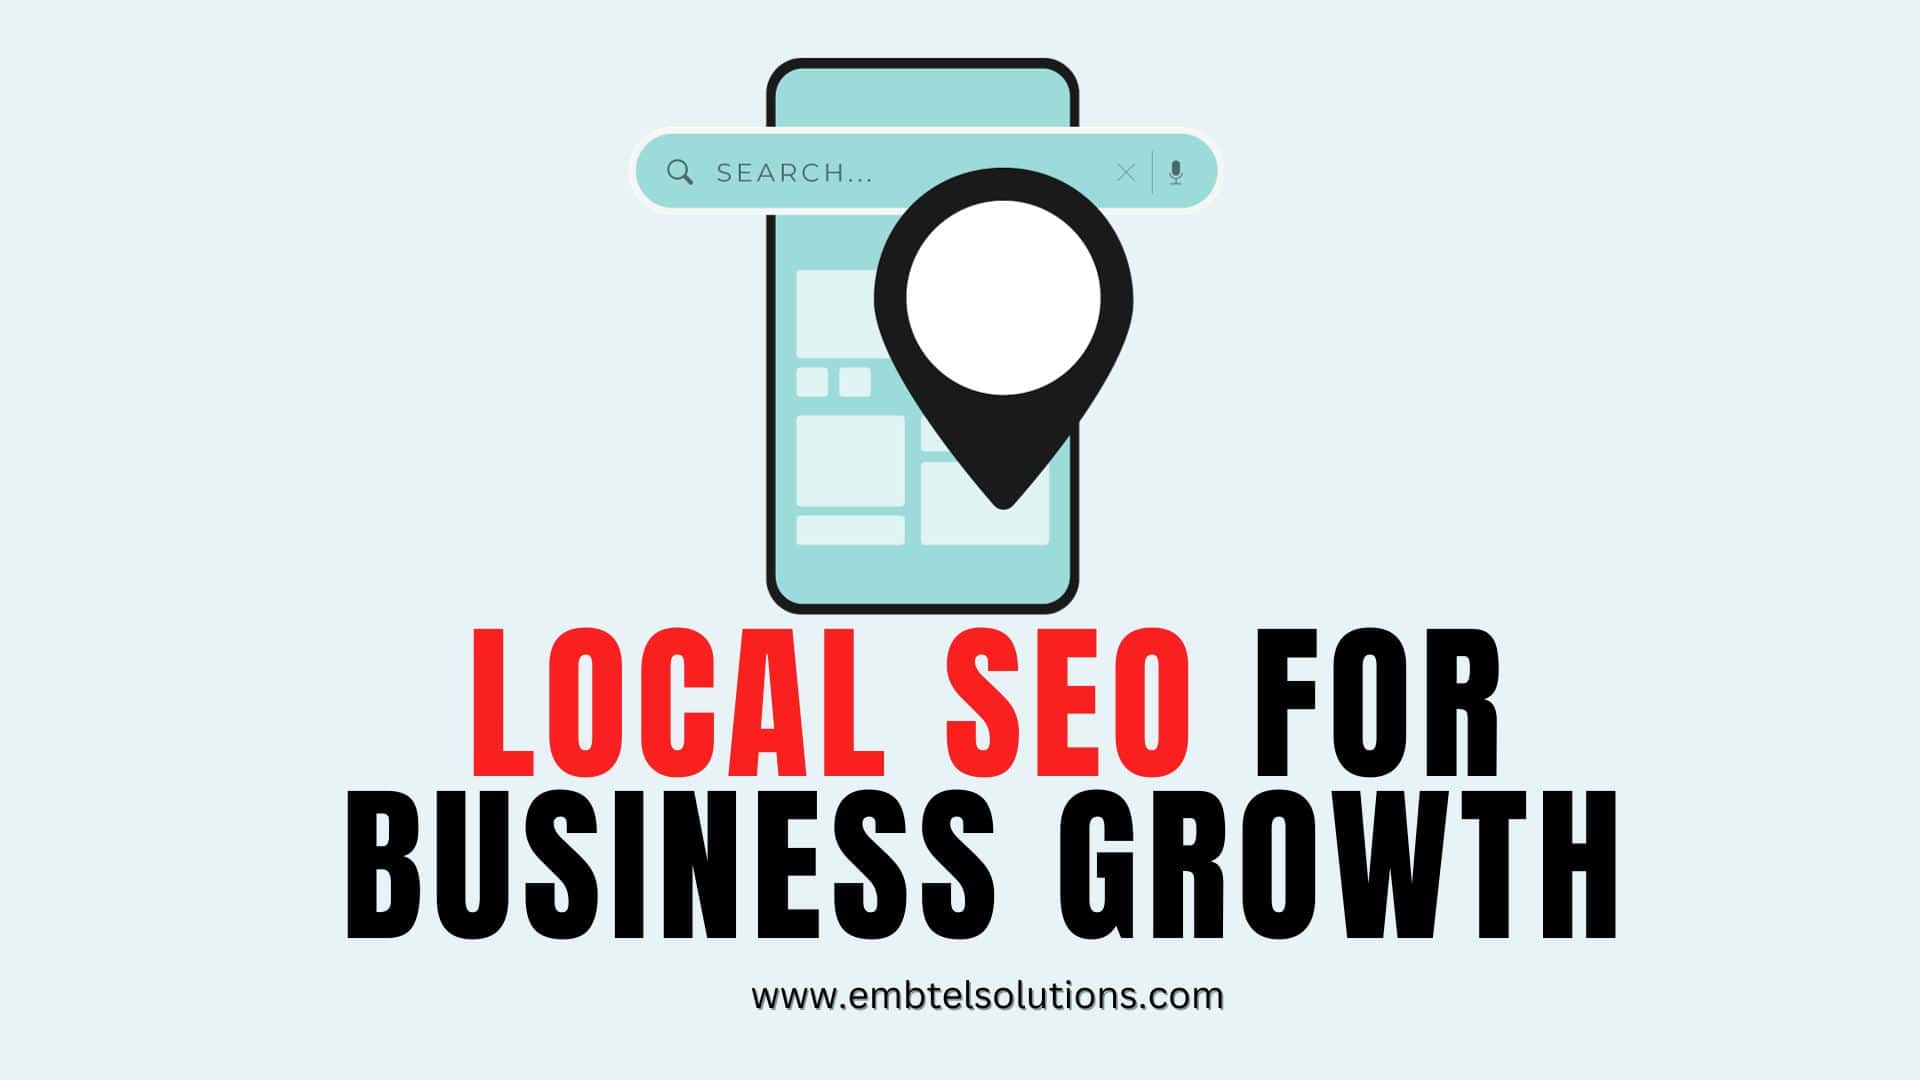 The Embtel Solutions Guide to Local SEO for Business Growth  